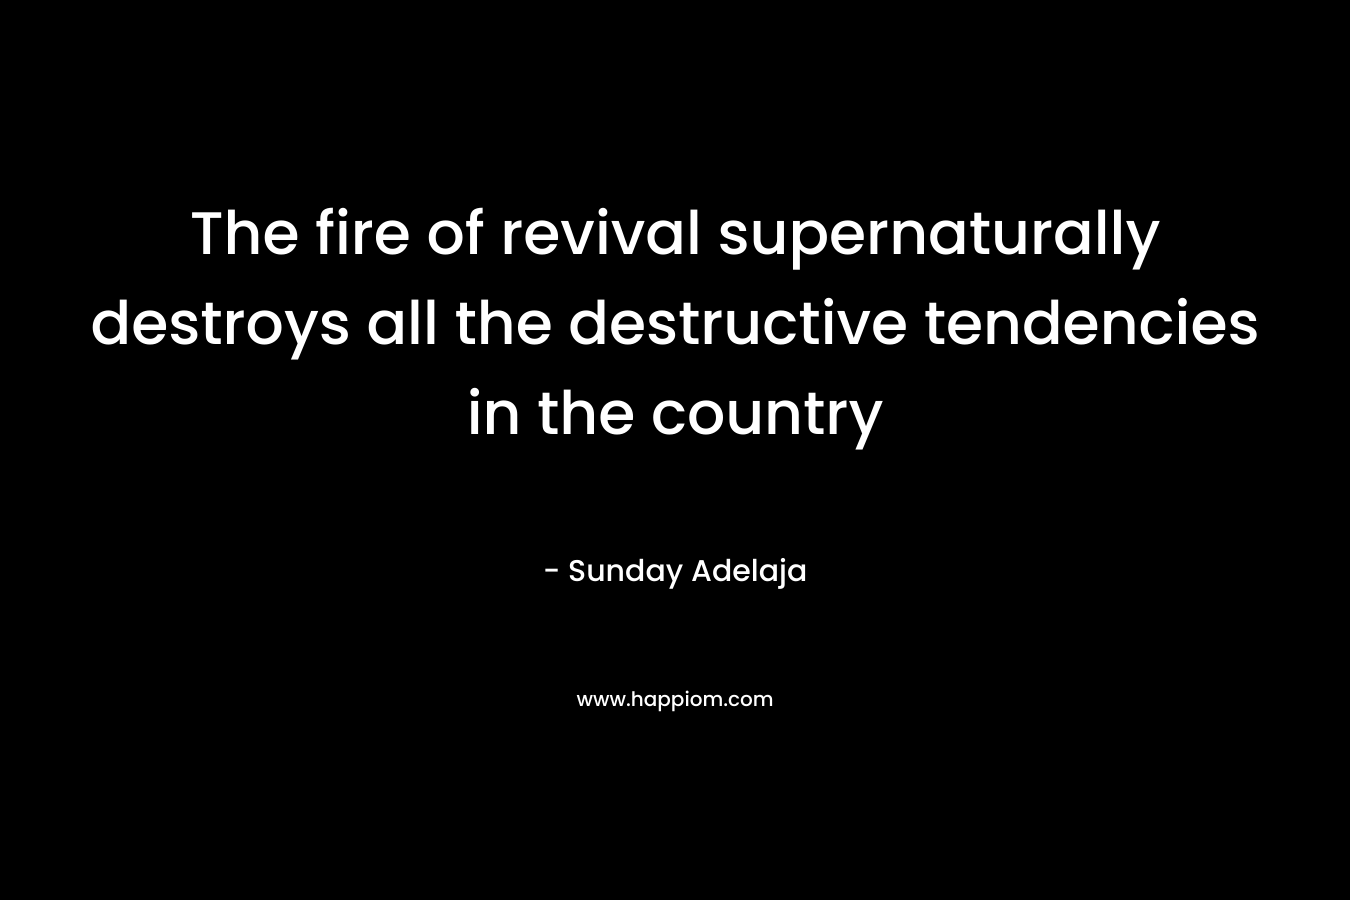 The fire of revival supernaturally destroys all the destructive tendencies in the country – Sunday Adelaja